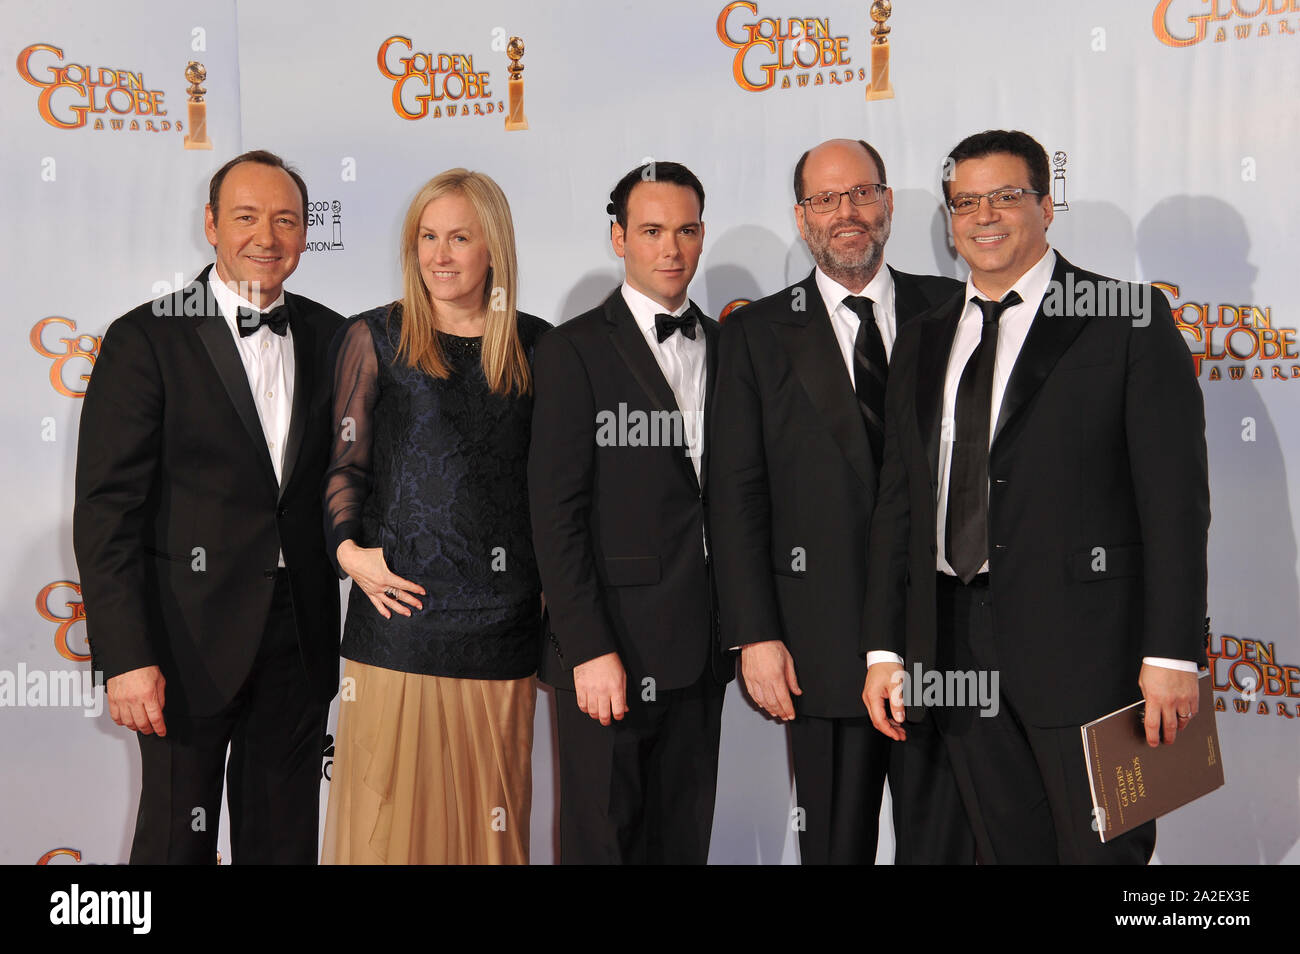 LOS ANGELES, CA. January 16, 2011: The Social Network producers Kevin Spacey, Cean Chaffin, David Brunetti, Scott Rudin and Micahel DeLuca at the 68th Annual Golden Globe Awards at the Beverly Hilton Hotel. © 2011 Paul Smith / Featureflash Stock Photo